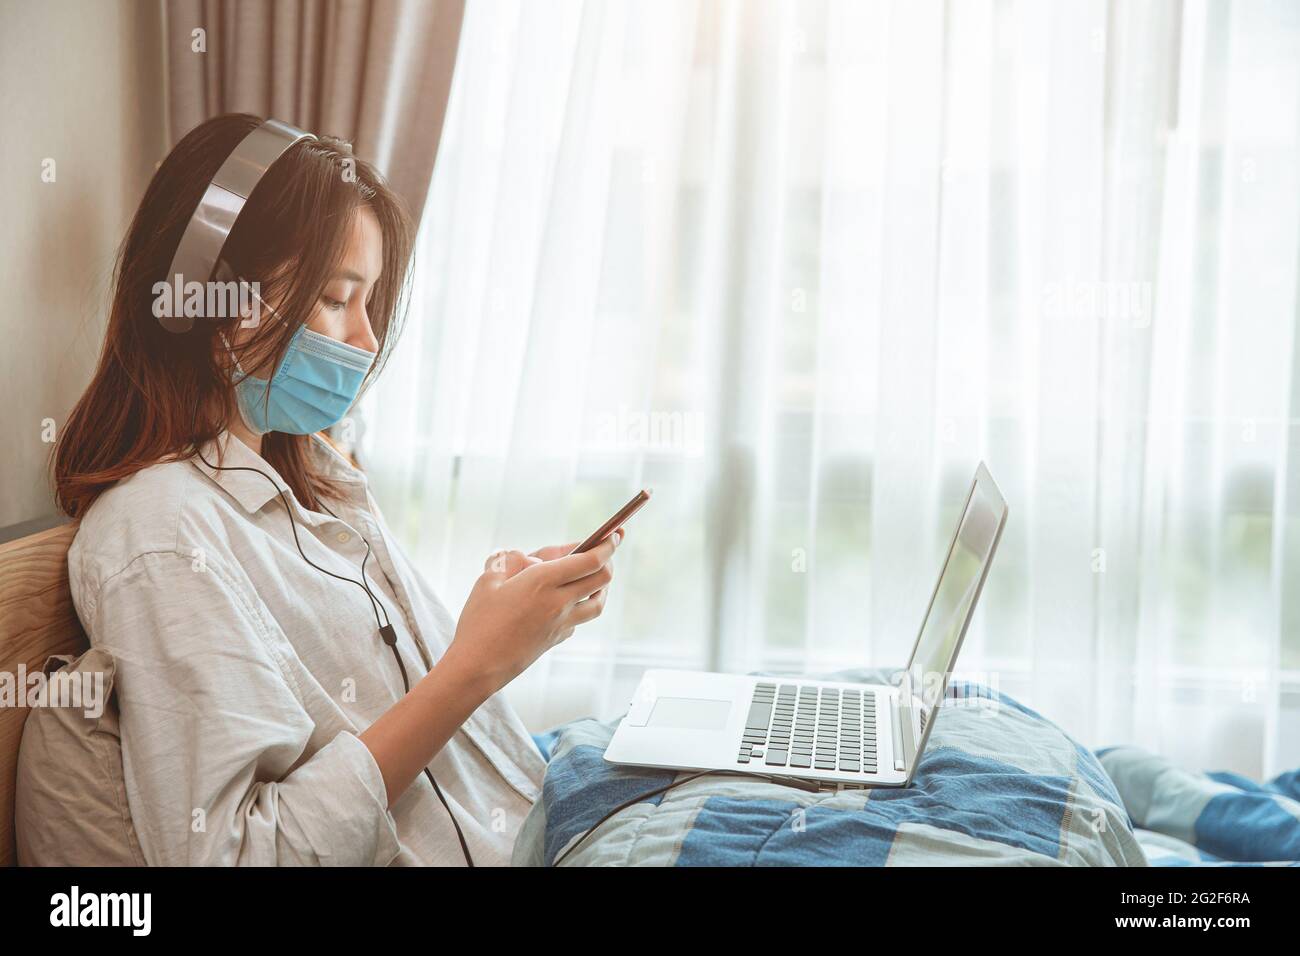 Girl teen covid self quarantine lockdown stay at home enjoy with smartphone internet laptop listening the music. Stock Photo